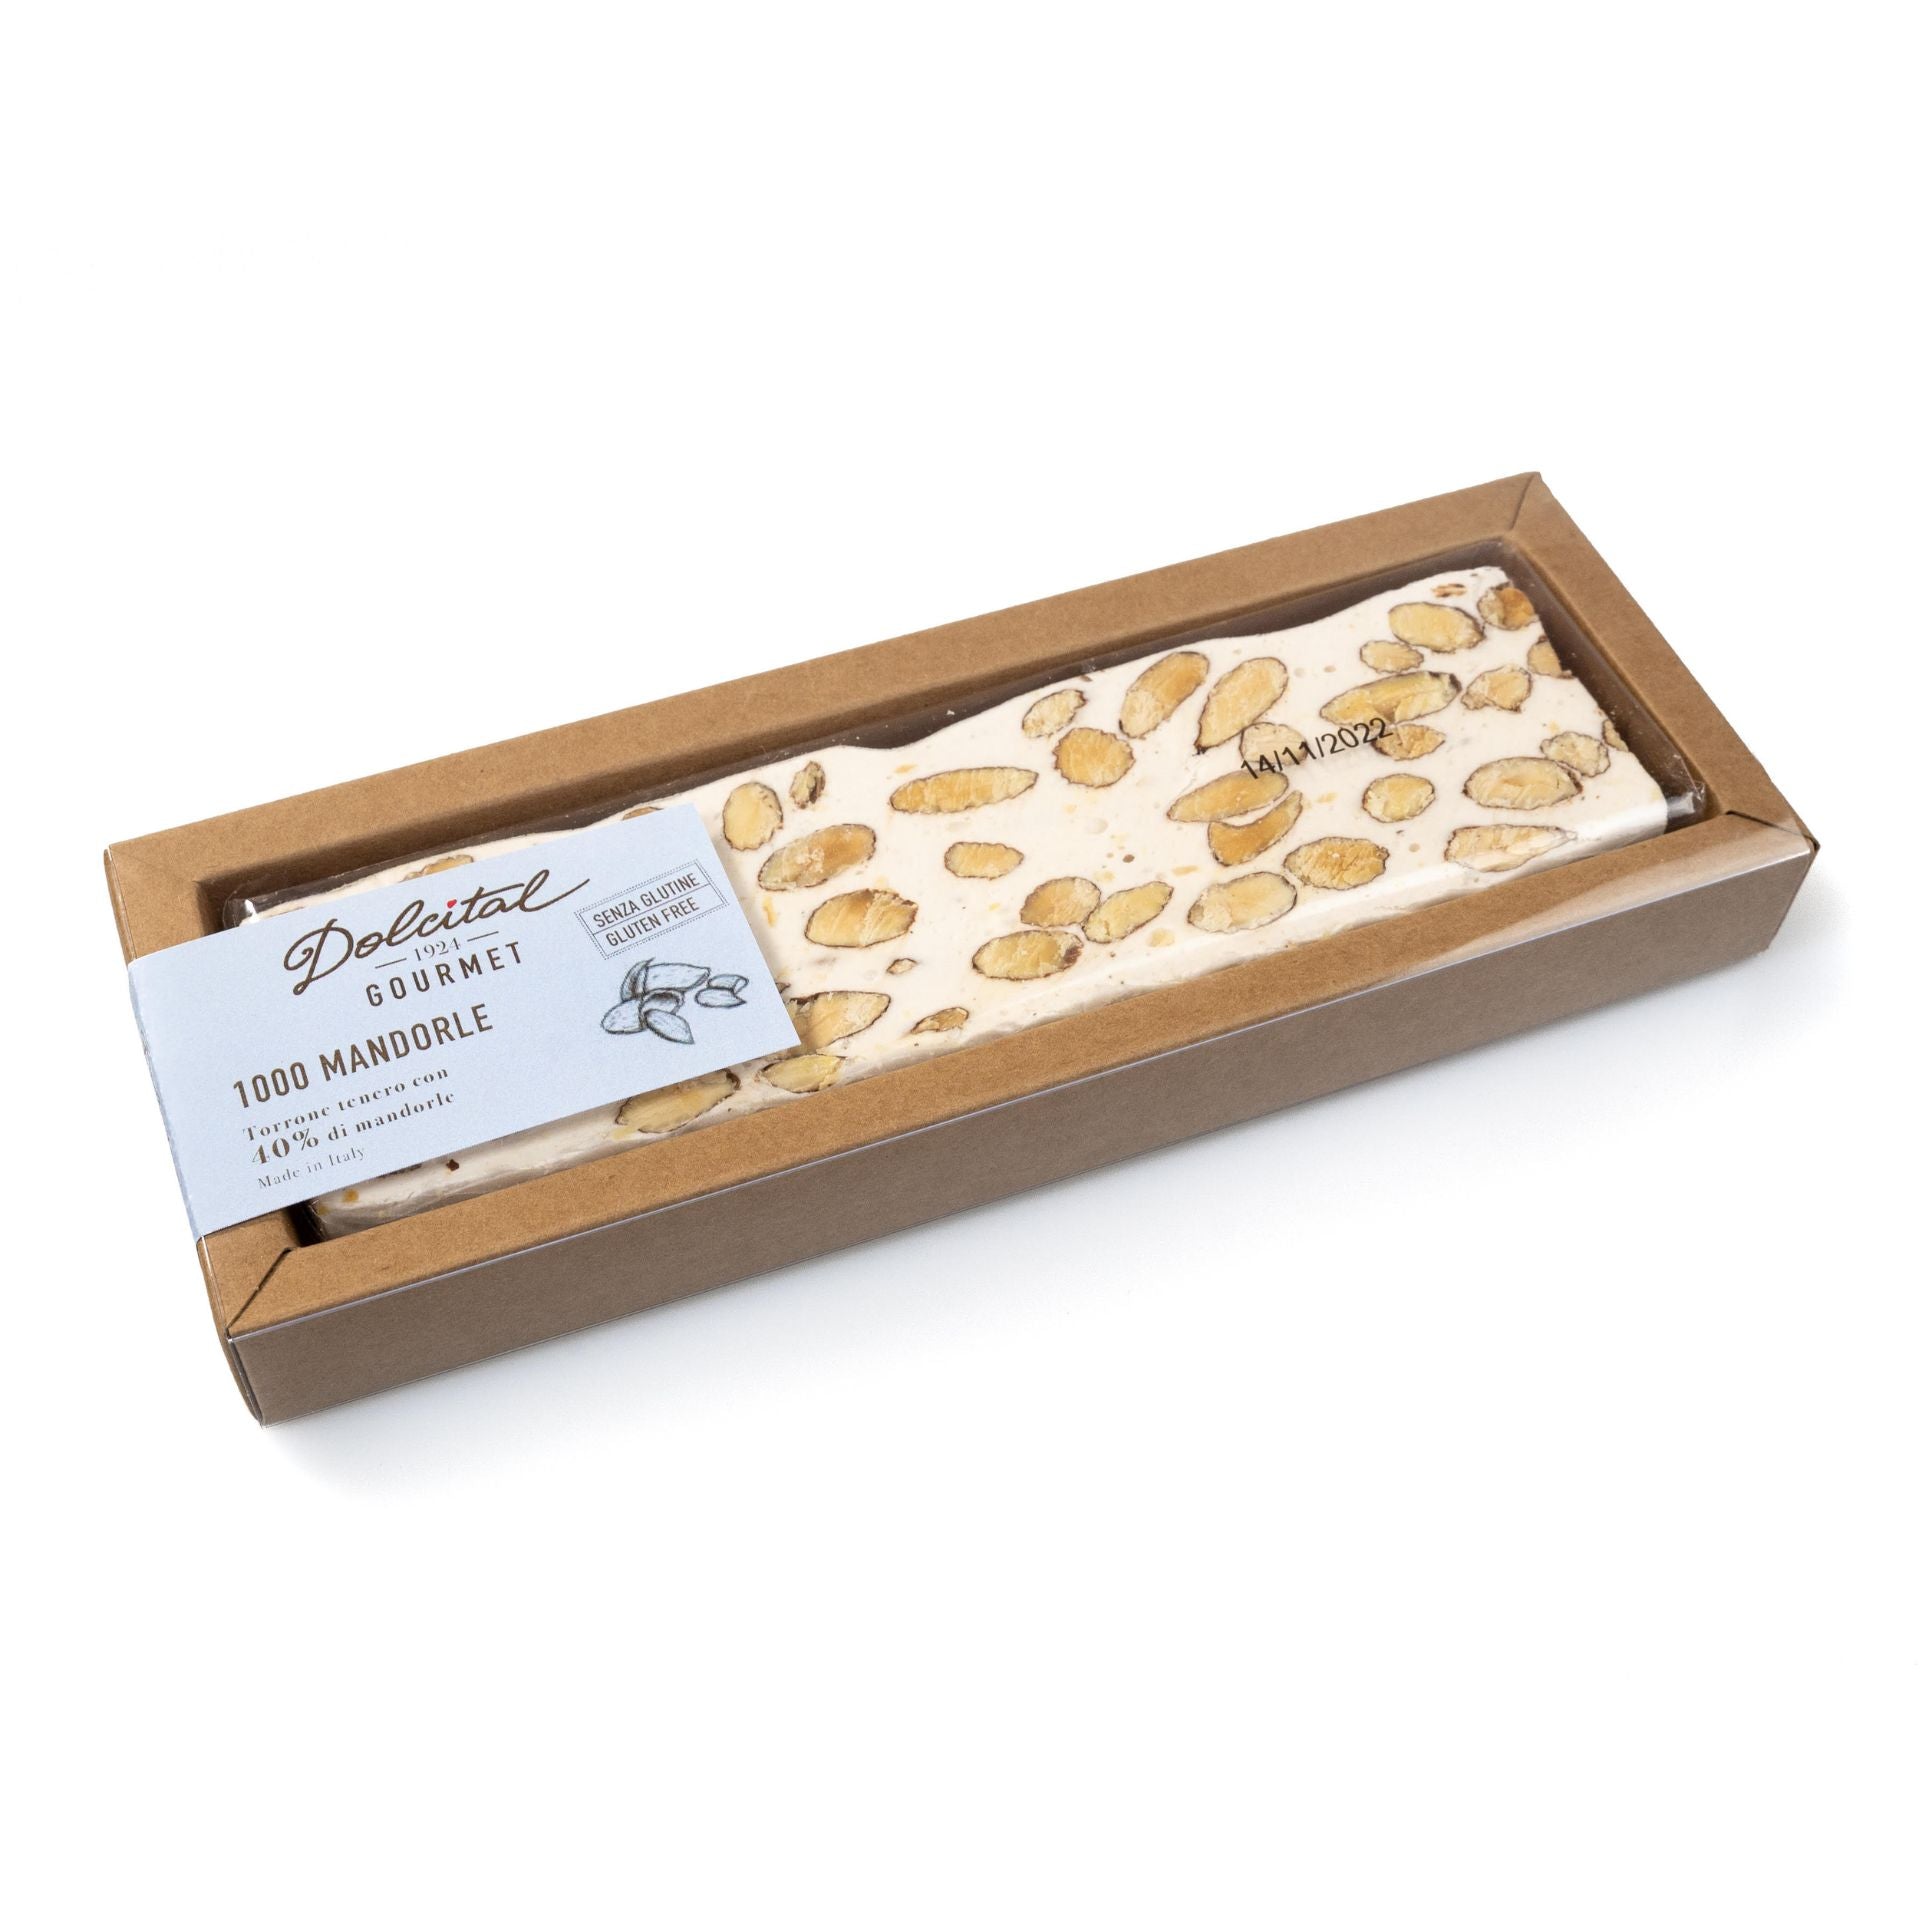 Dolcital Gourmet Soft Nougat with 40% Almonds 180g Feast Italy